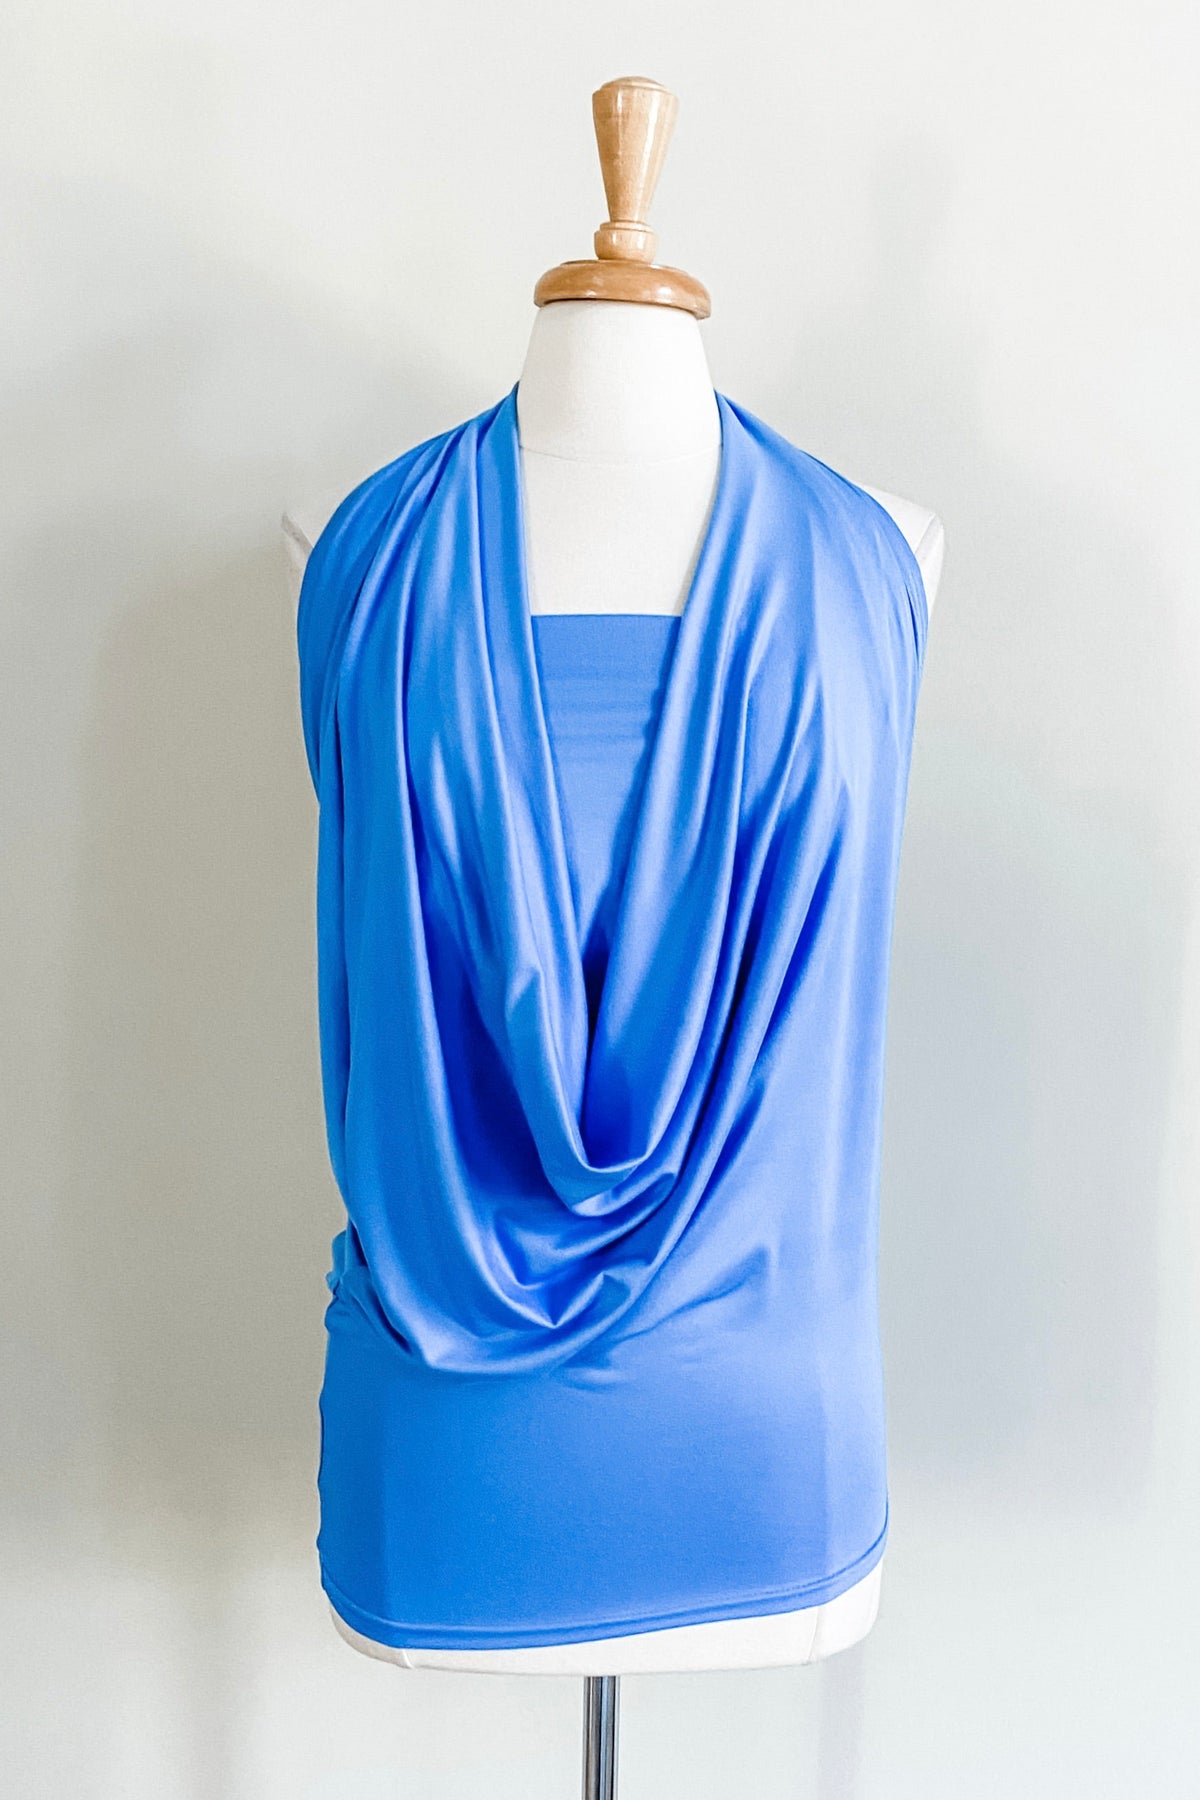 Diane Kroe Origami Dress (Sky Blue) - The Classic Capsule Collection